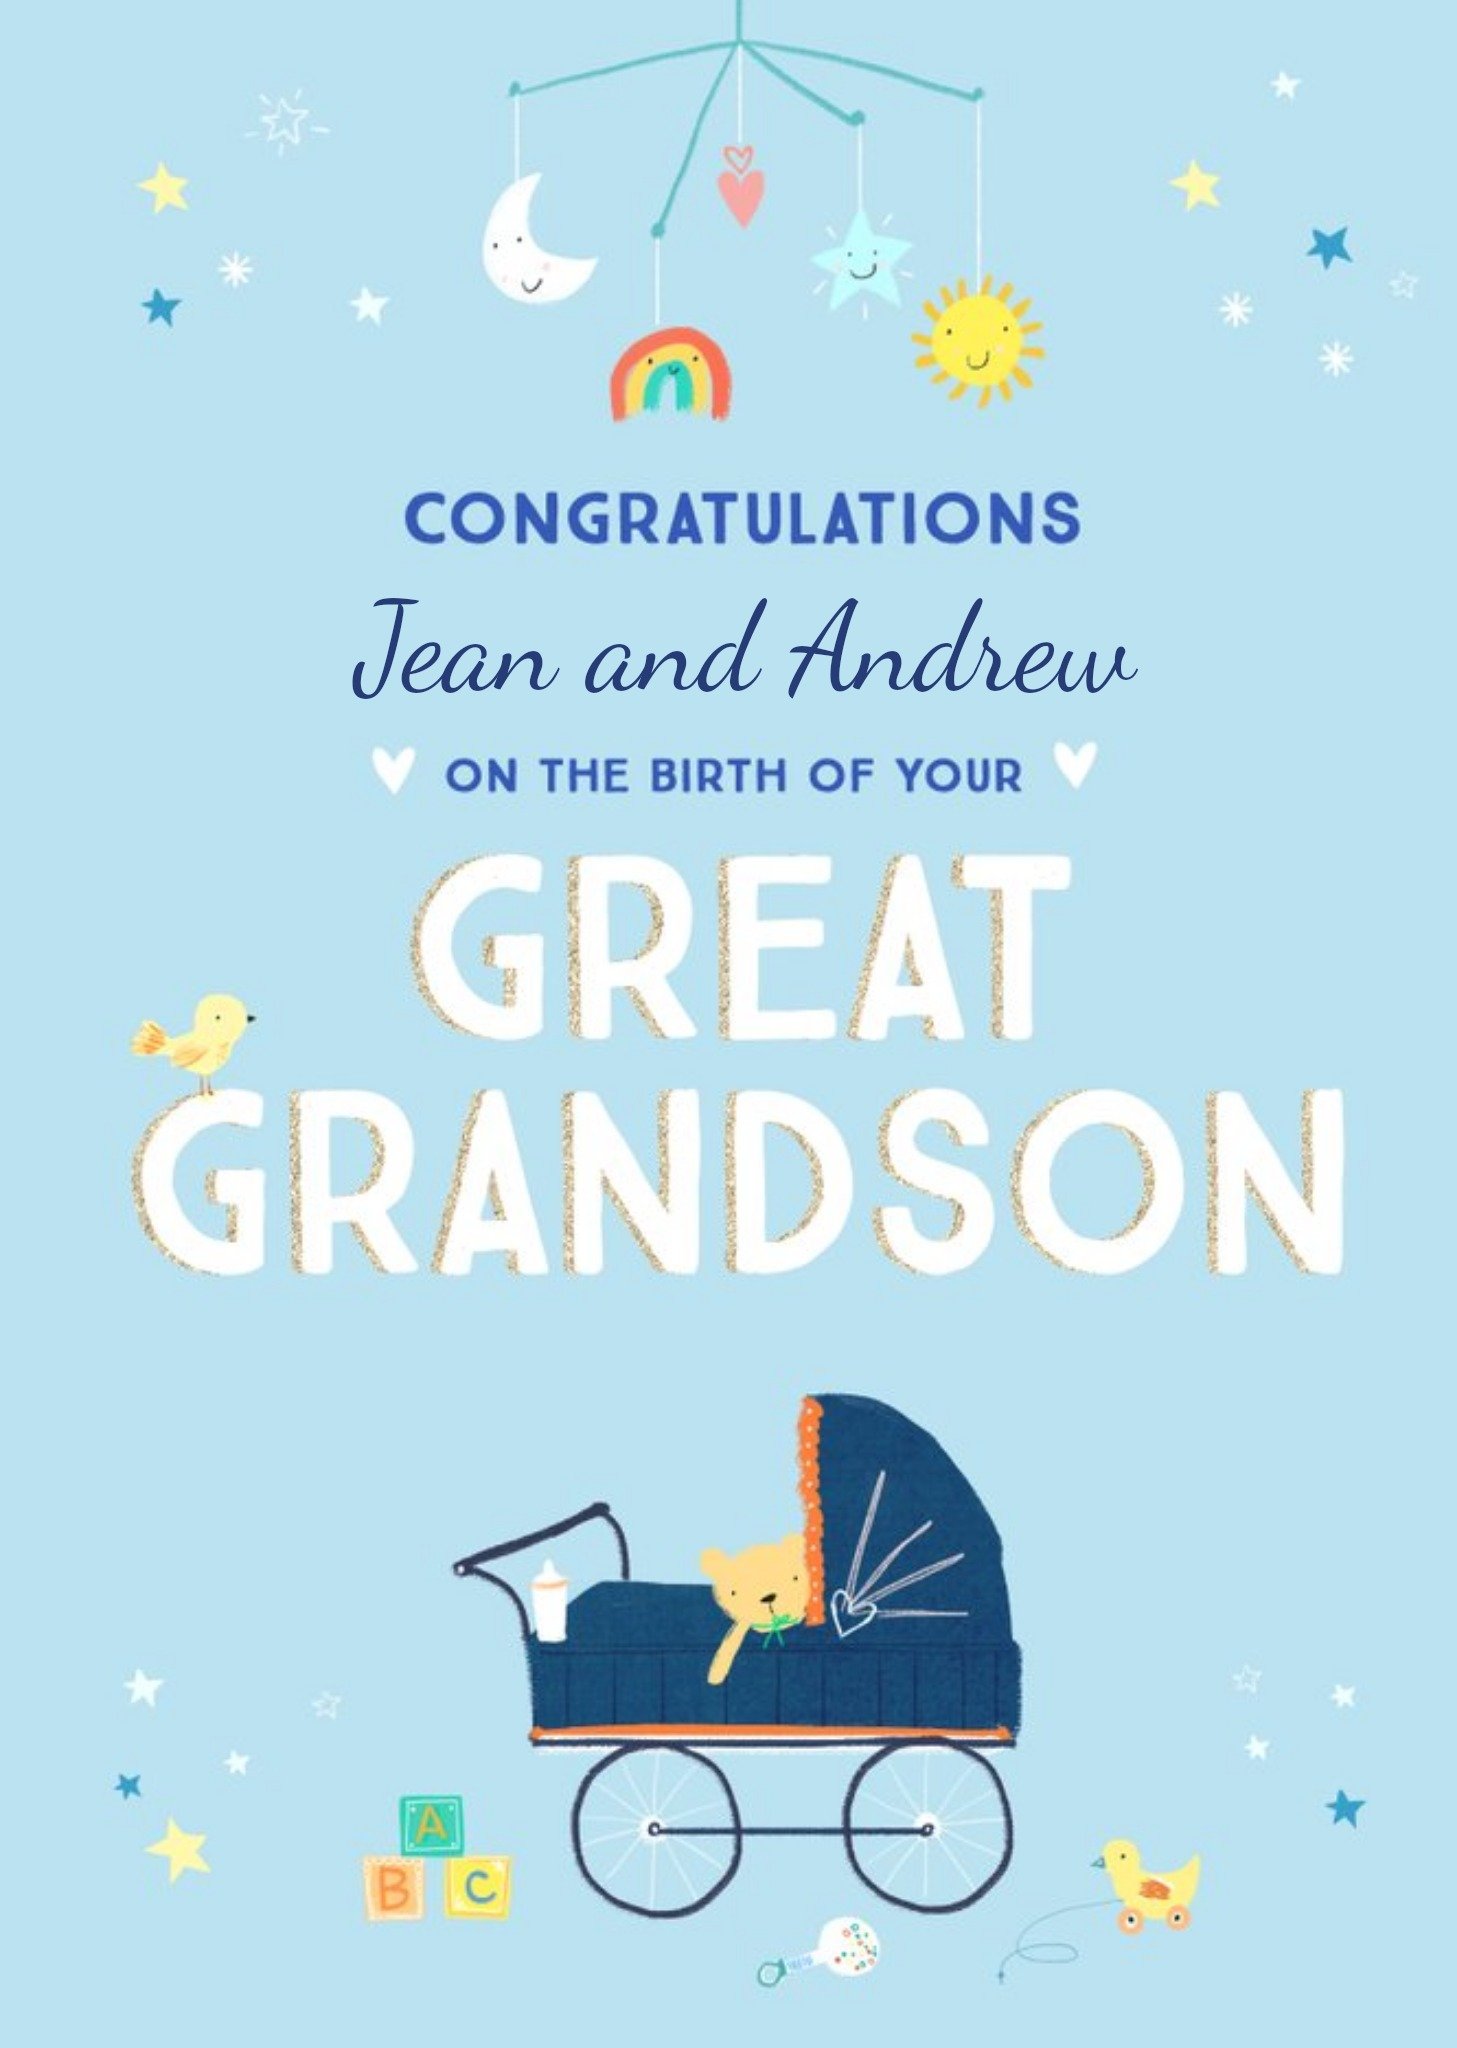 Moonpig Typographic Illustrated Congratulations On The Birth Of Your Great Grandson Card Ecard